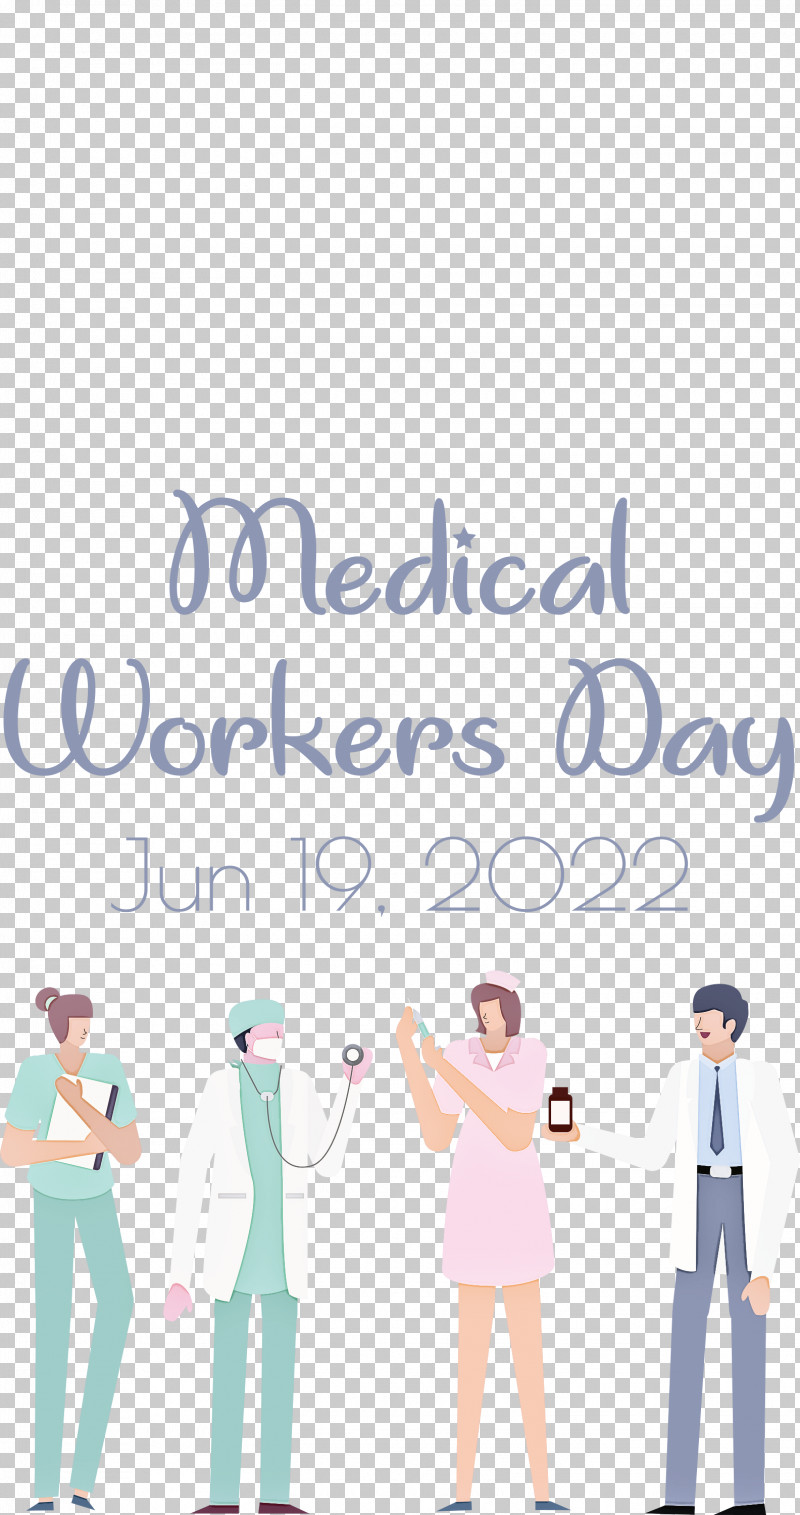 Medical Workers Day PNG, Clipart, Behavior, Cartoon, Conversation, Happiness, Hm Free PNG Download